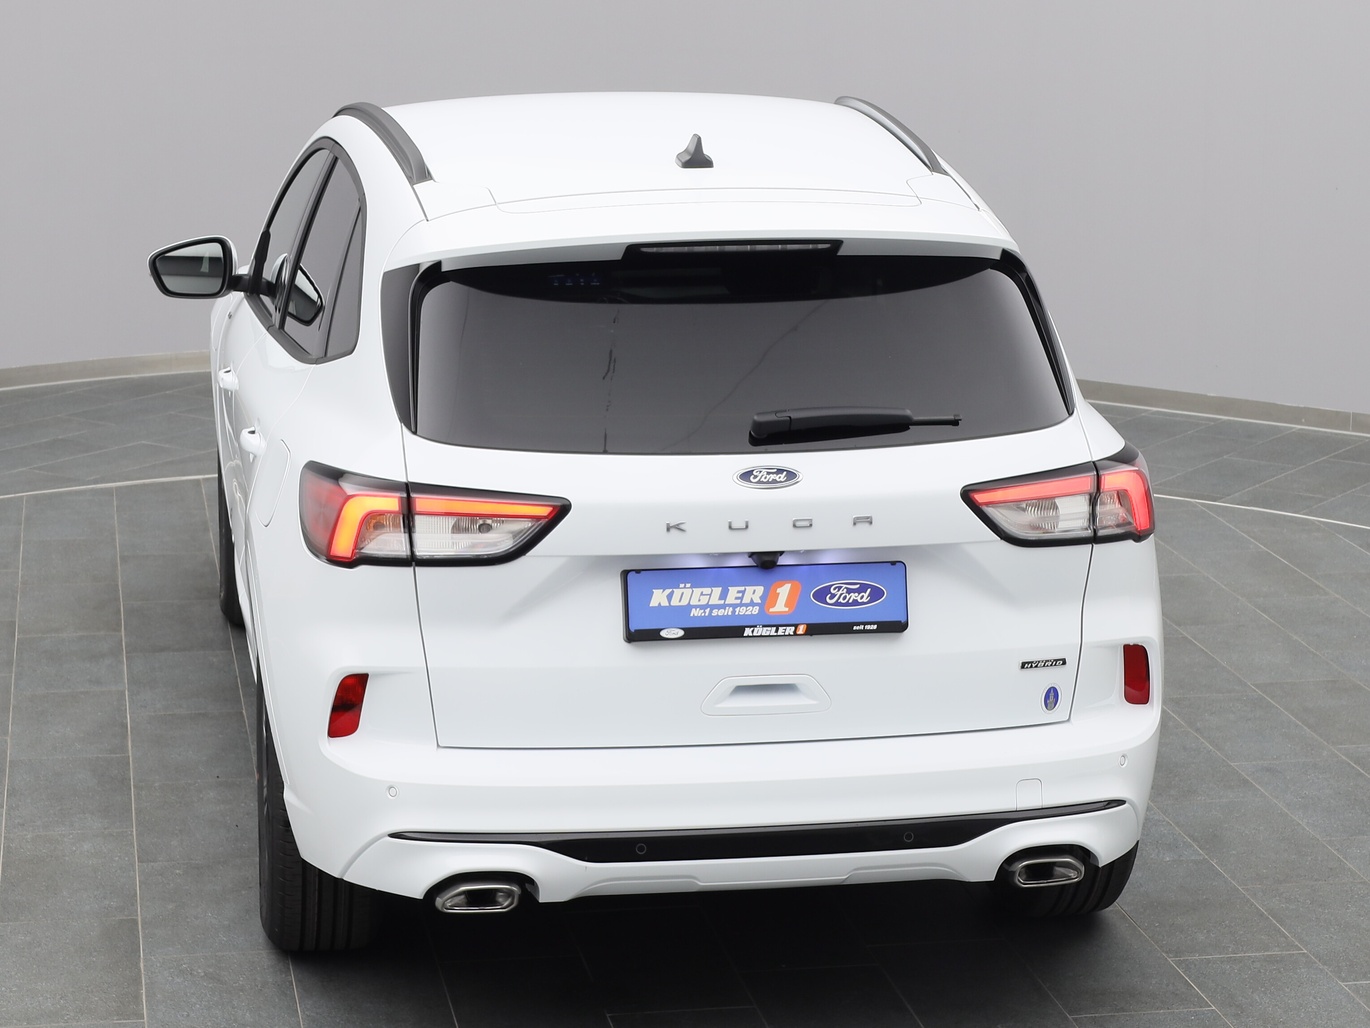  Ford Kuga ST-Line 225PS Plug-in-Hybrid Aut. in Weiss 